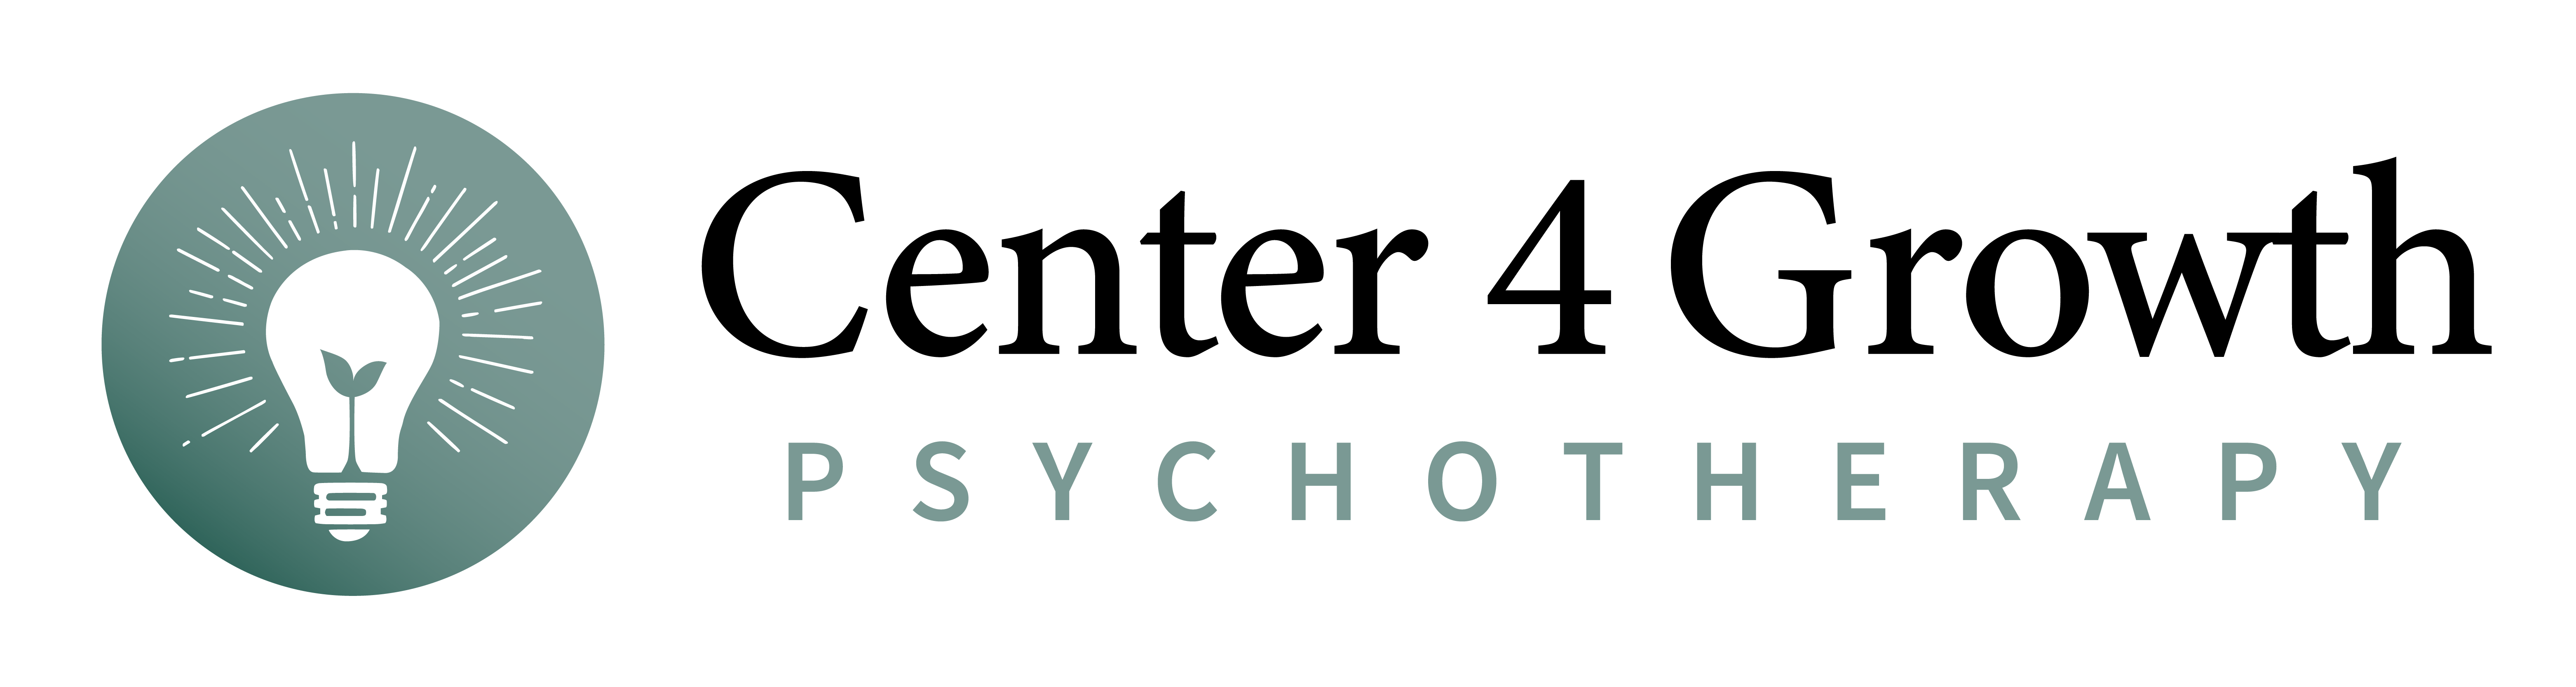 Center 4 Growth Psychotherapy Logo